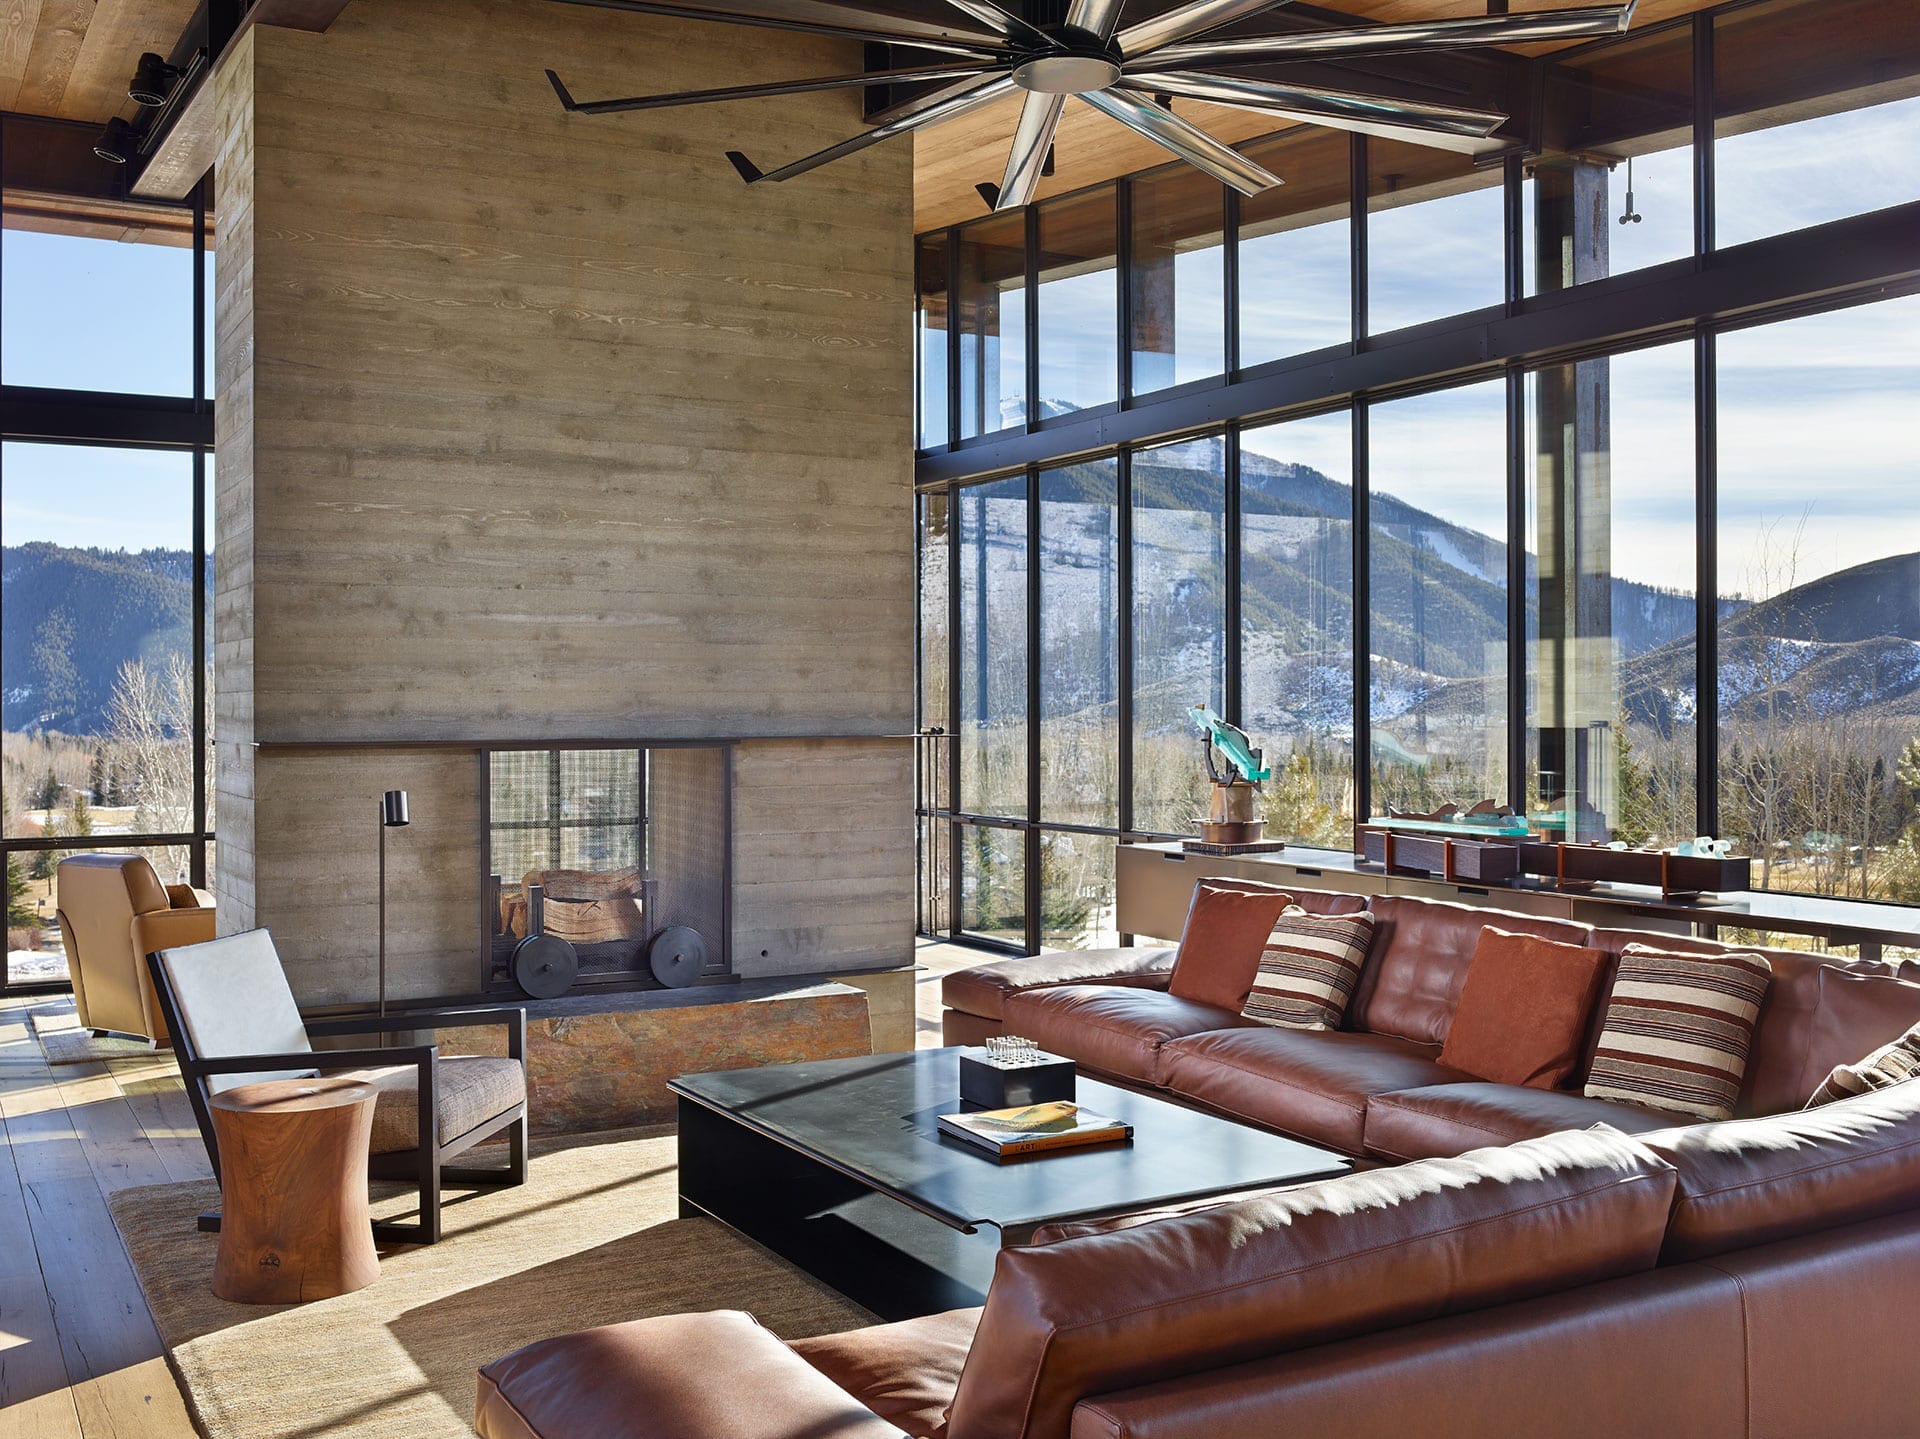 Massive fireplace, couches and steel residential storefront windows in background